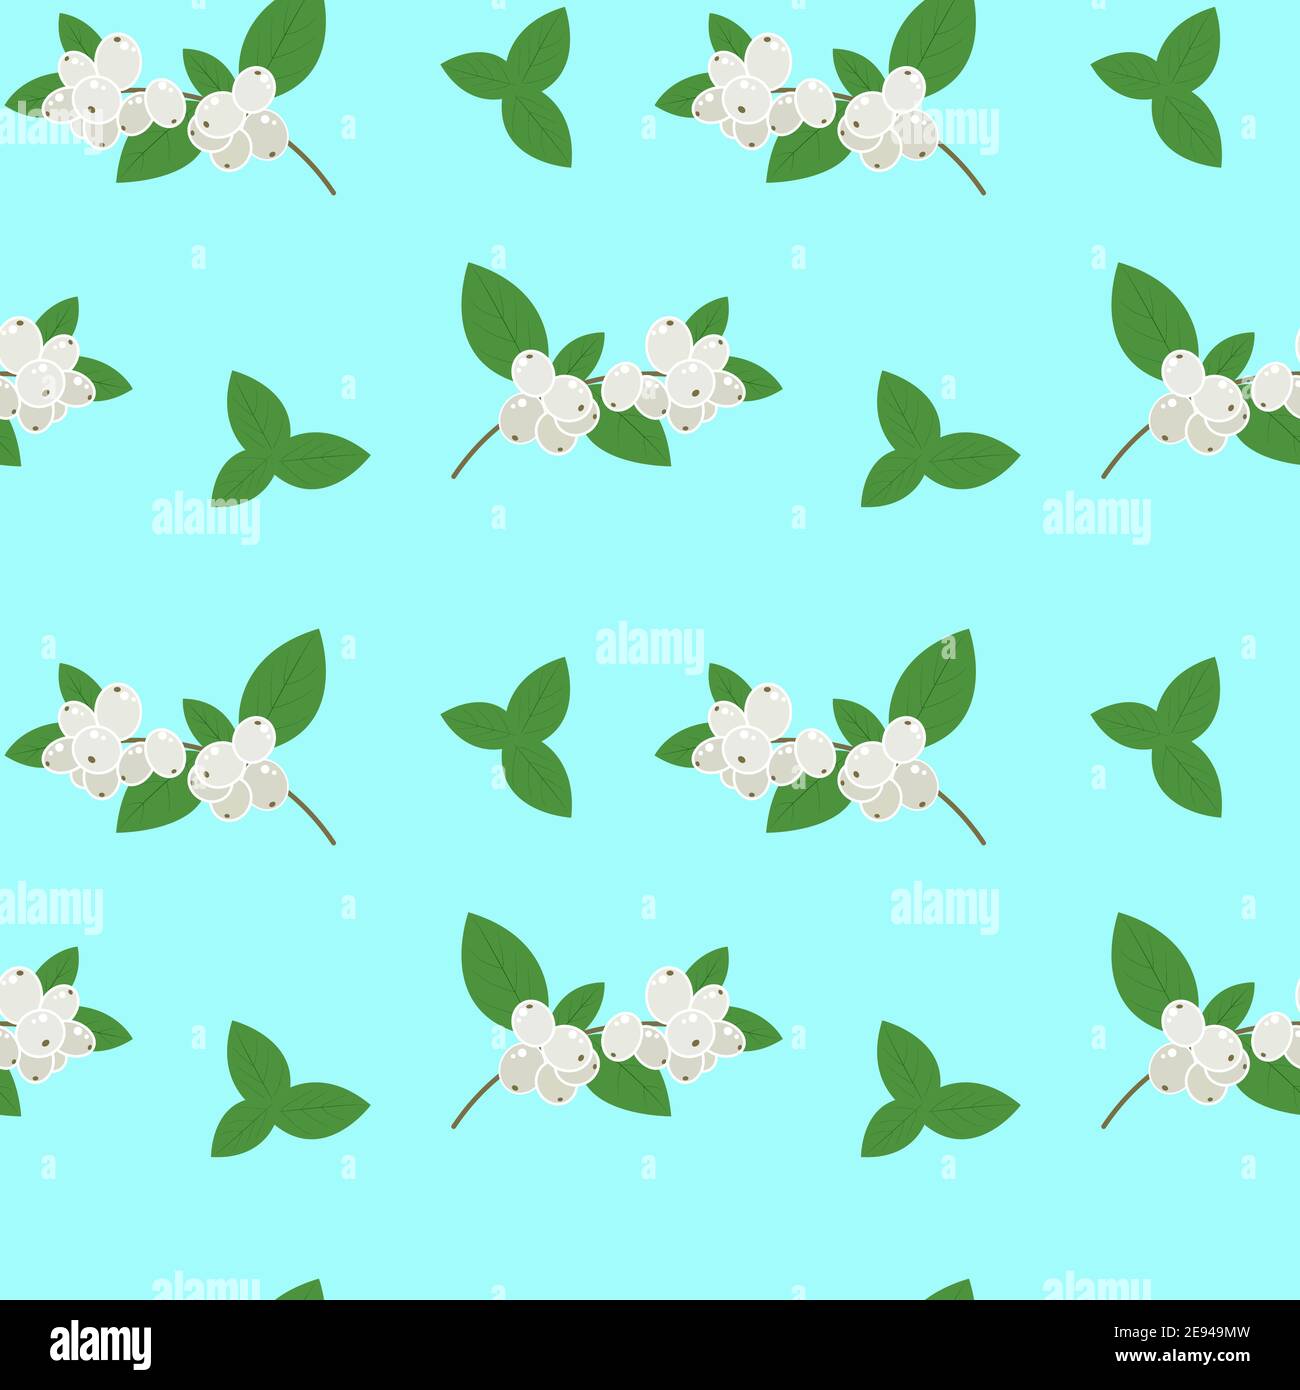 Snow berry pattern. Vector with white snowberries on a blue background. Seamless pattern. Stock Vector